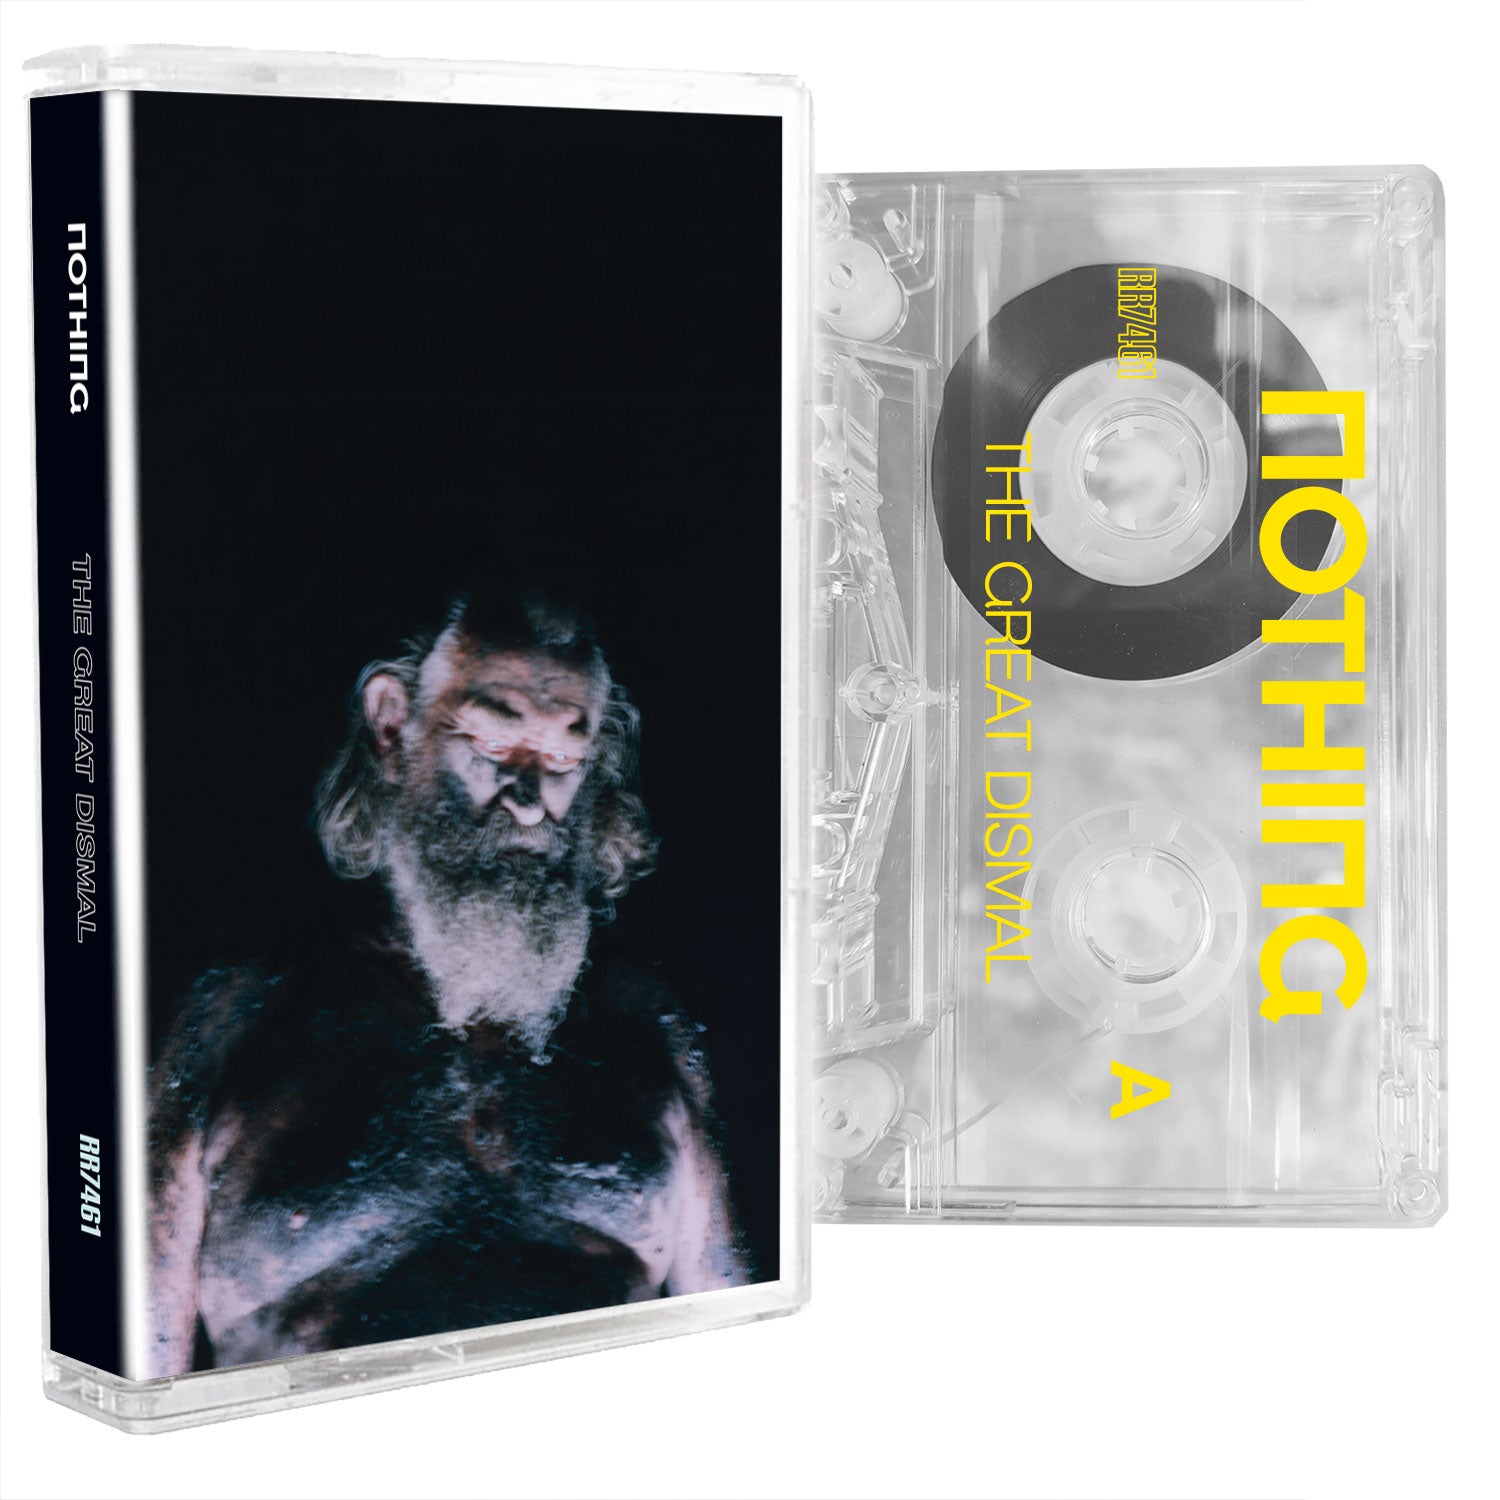 Nothing "The Great Dismal" Cassette